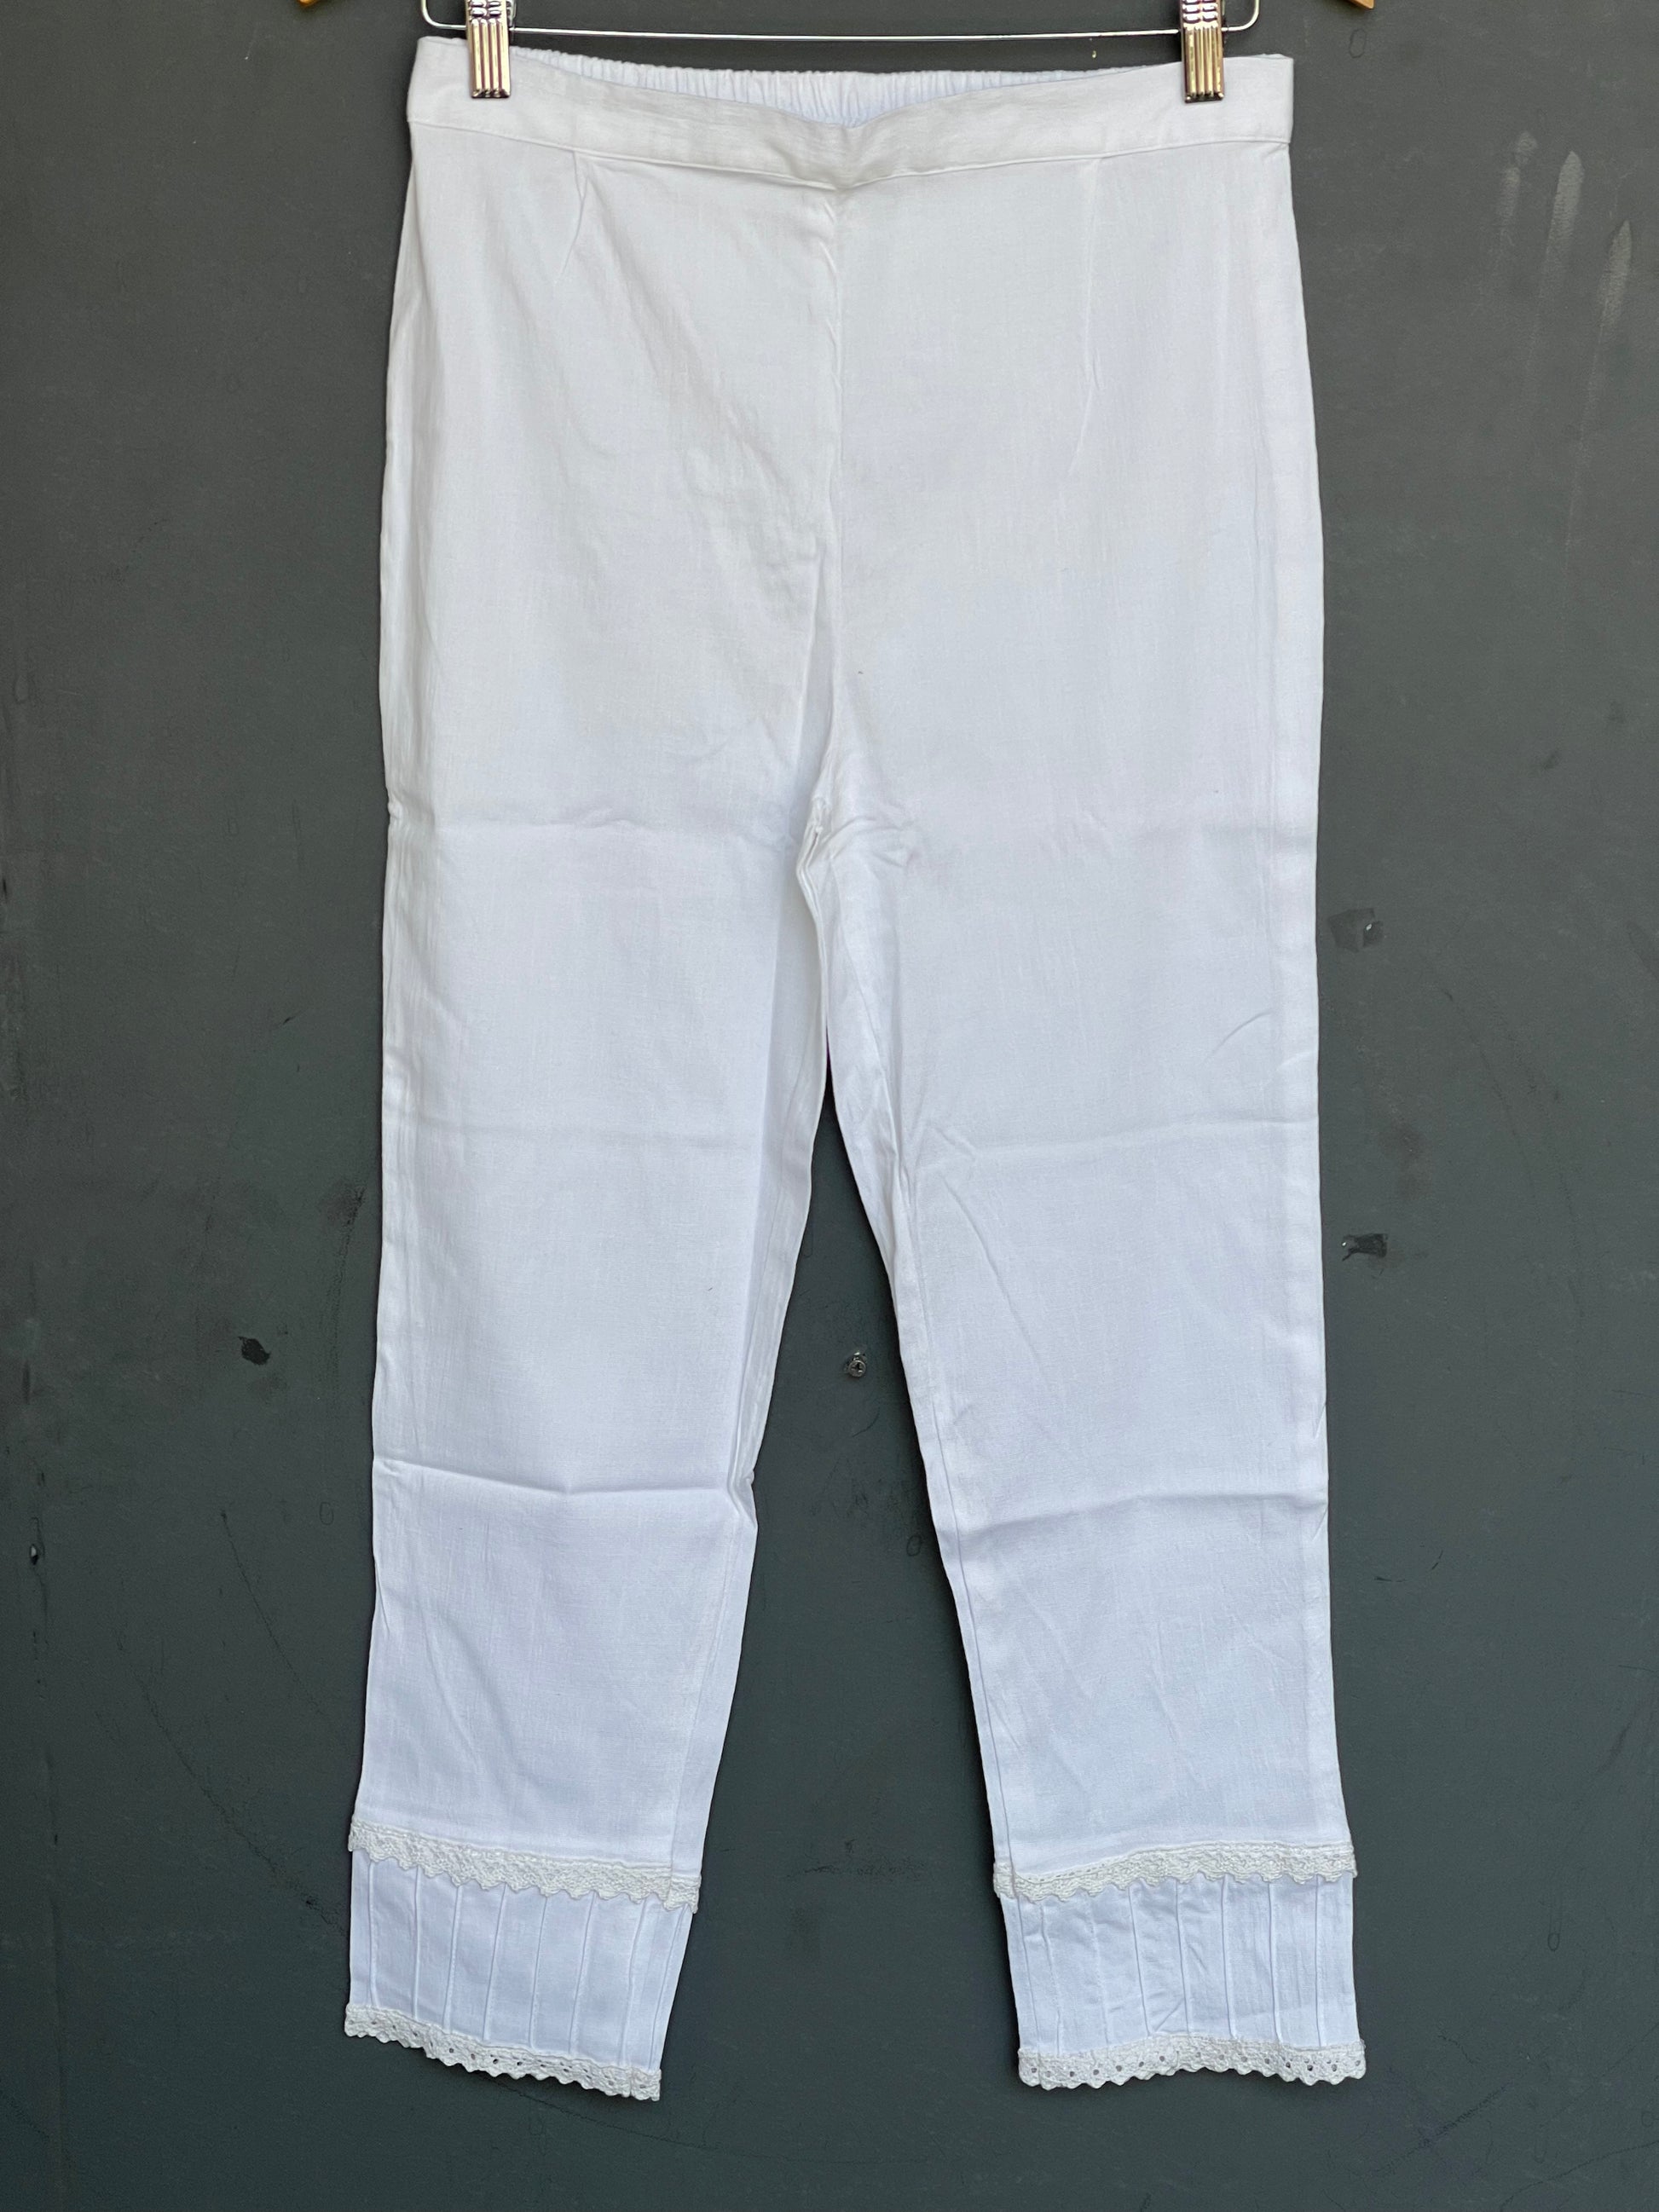 White Cotton Lycra pants with lace and pin-tucks detailing for hem